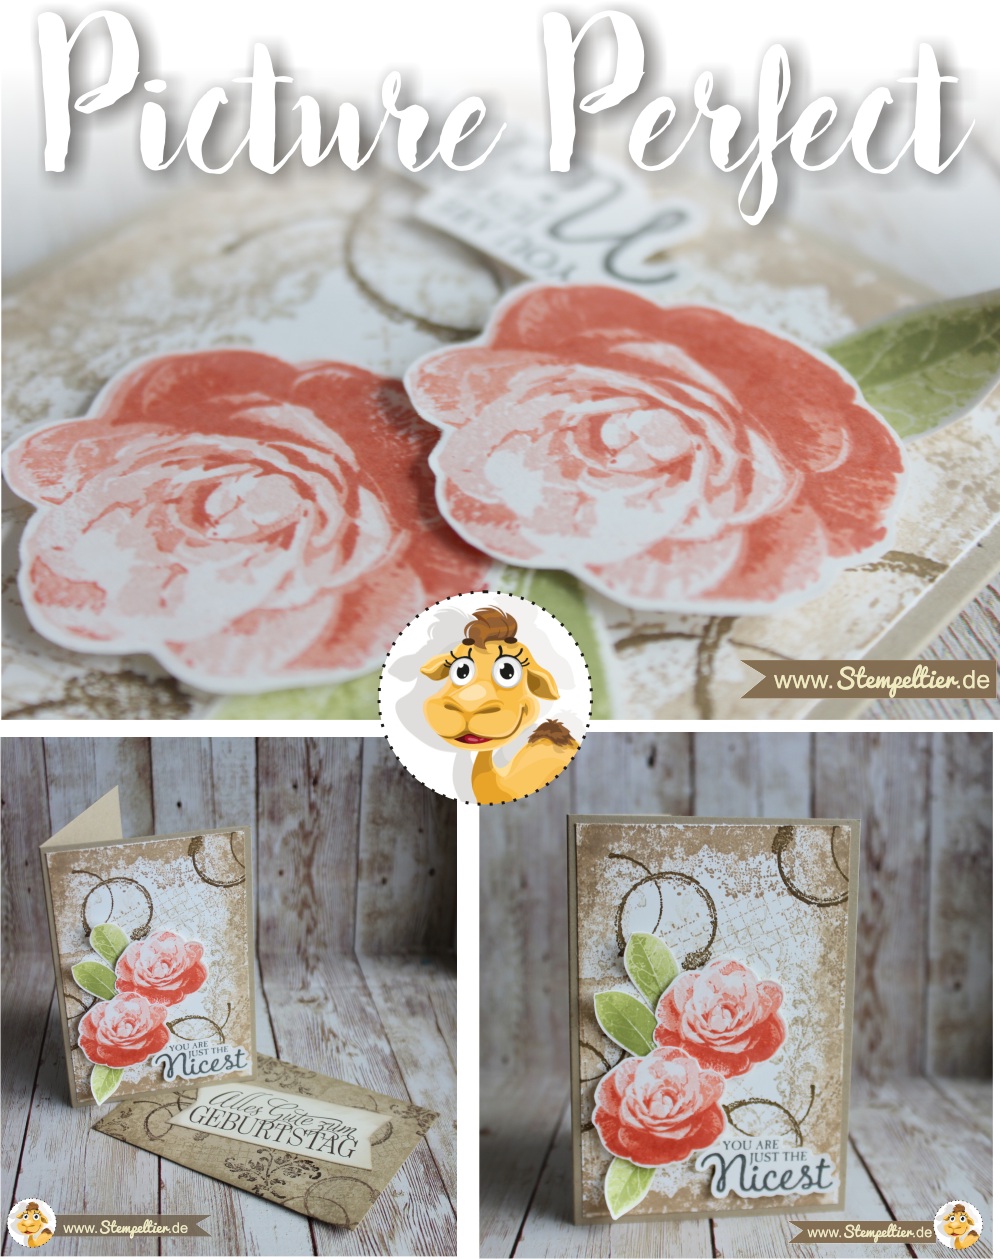 picture perfect timeless textures Rosen roses stempeltier grußkarte geburtstag you are just the nicest 2 step stamping technique